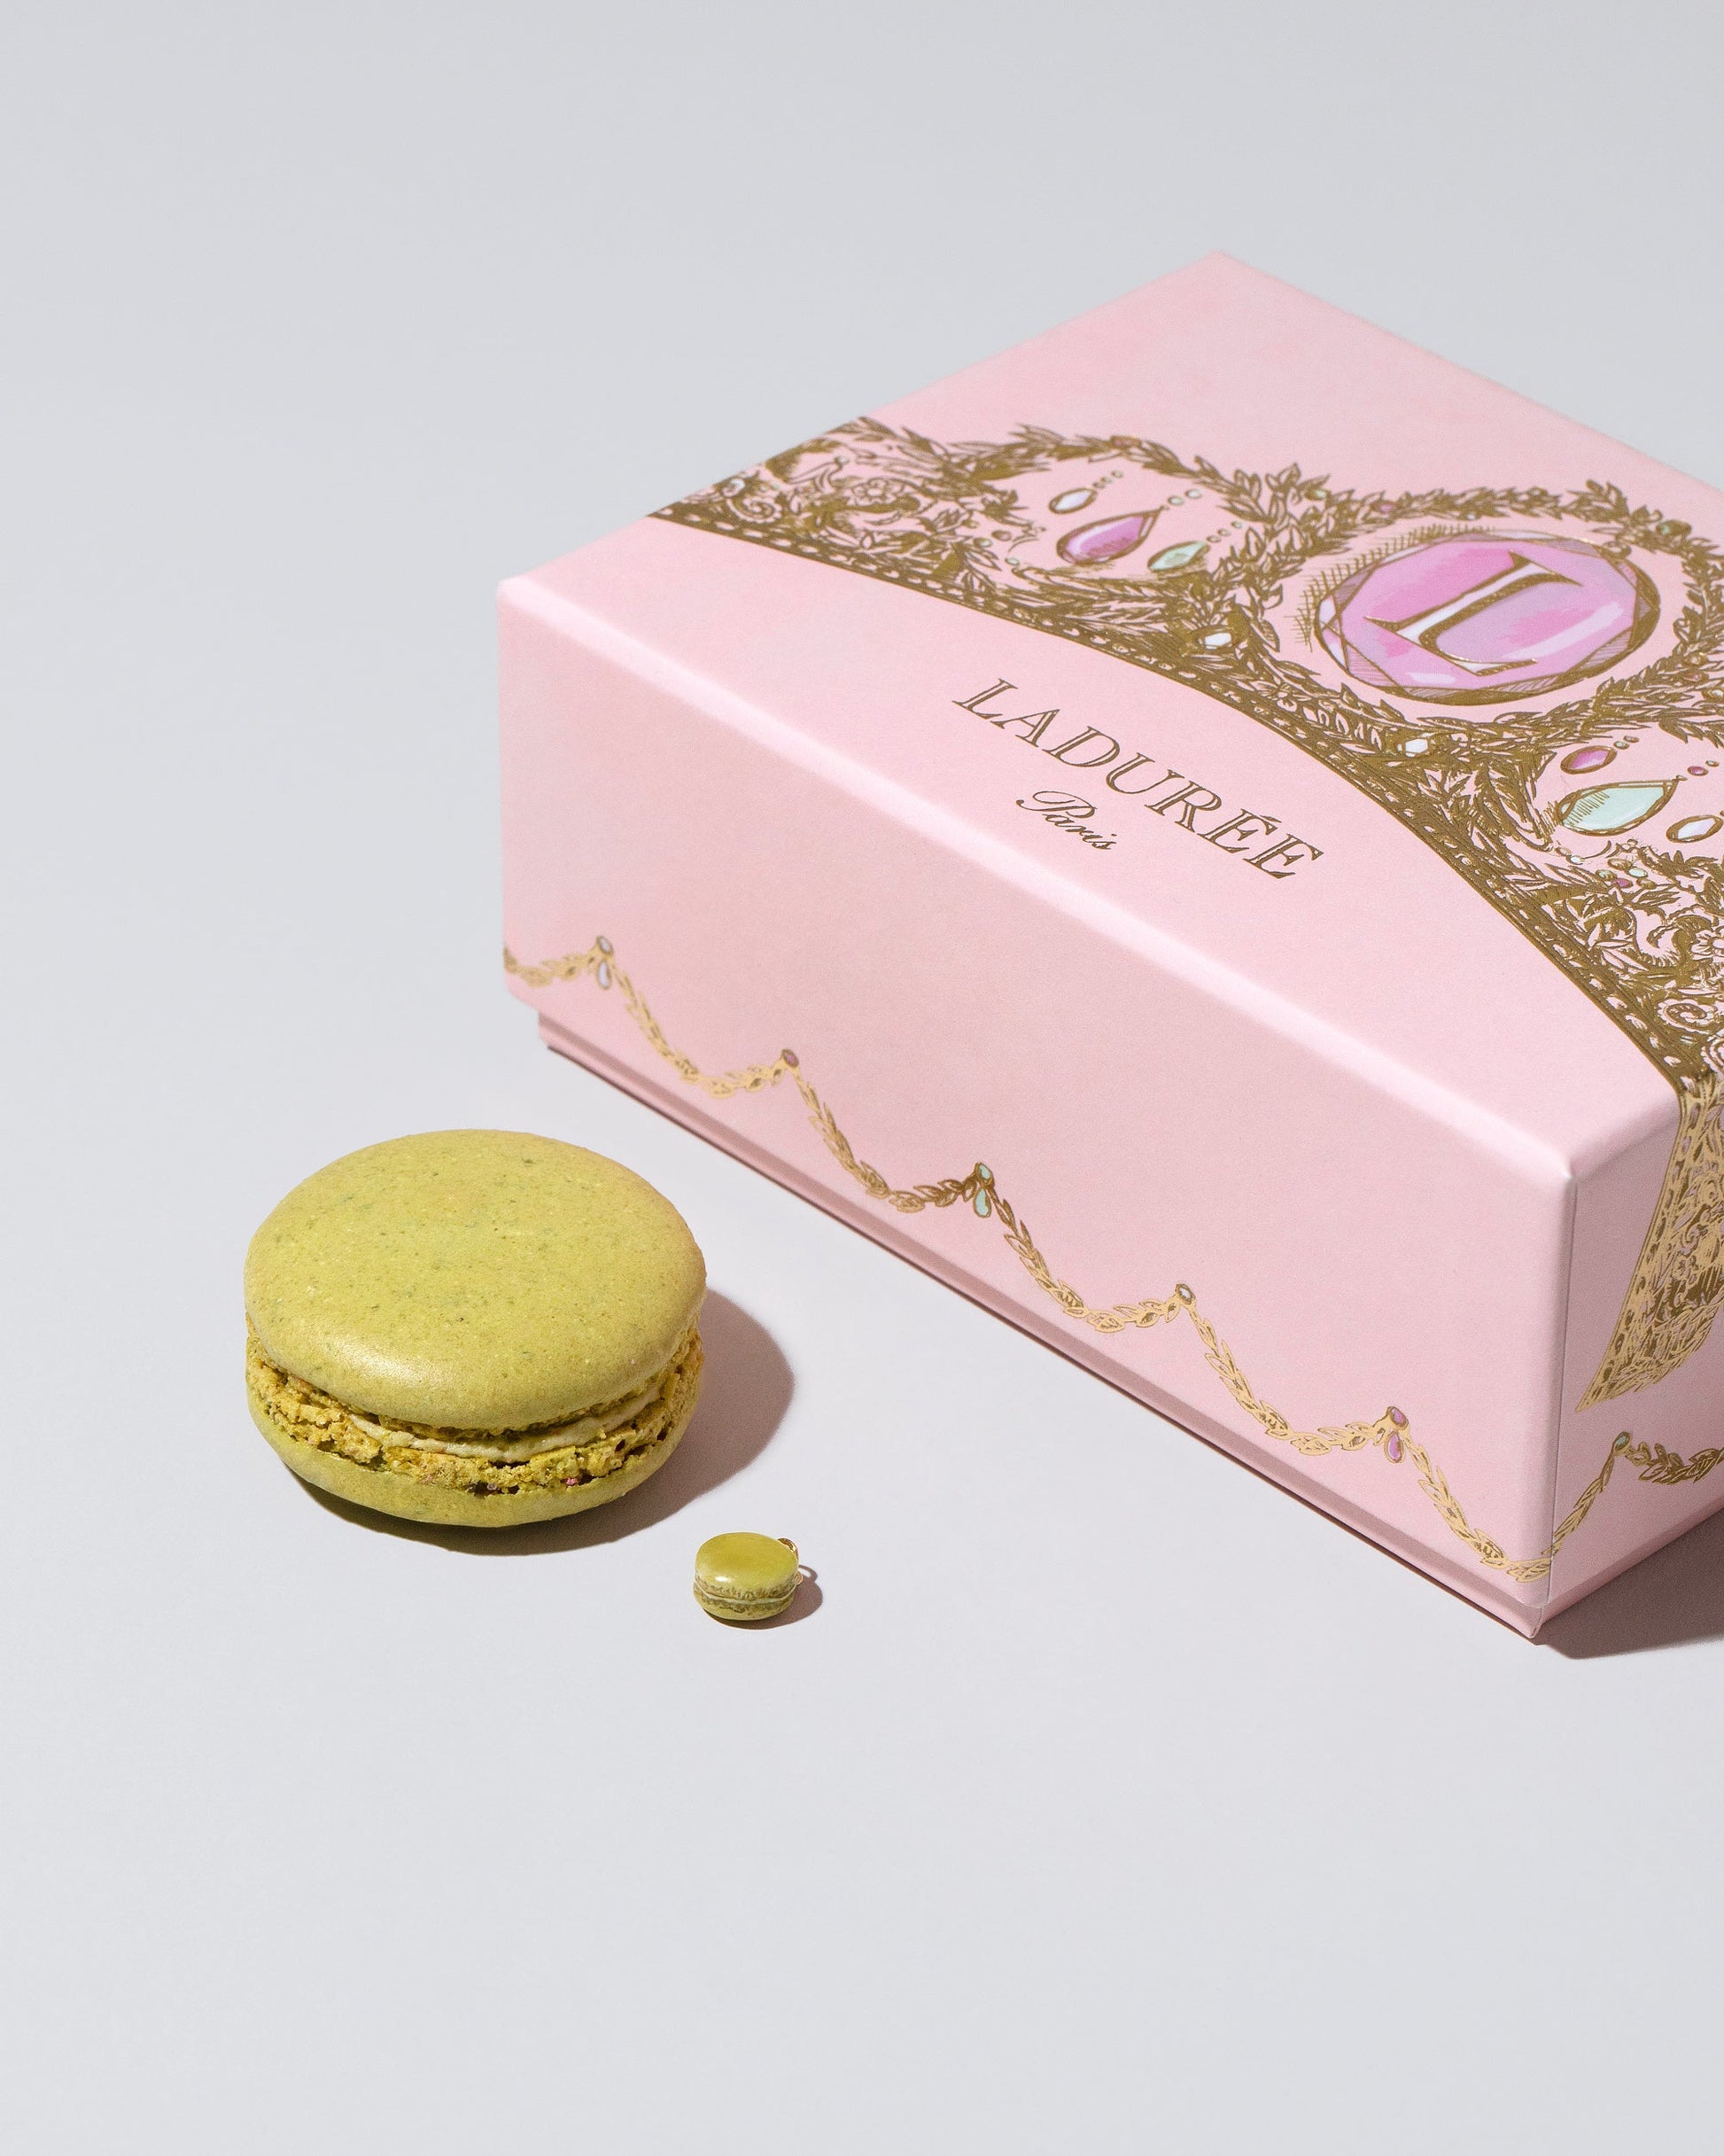 Product photo of Macaron Gift Set on light color background